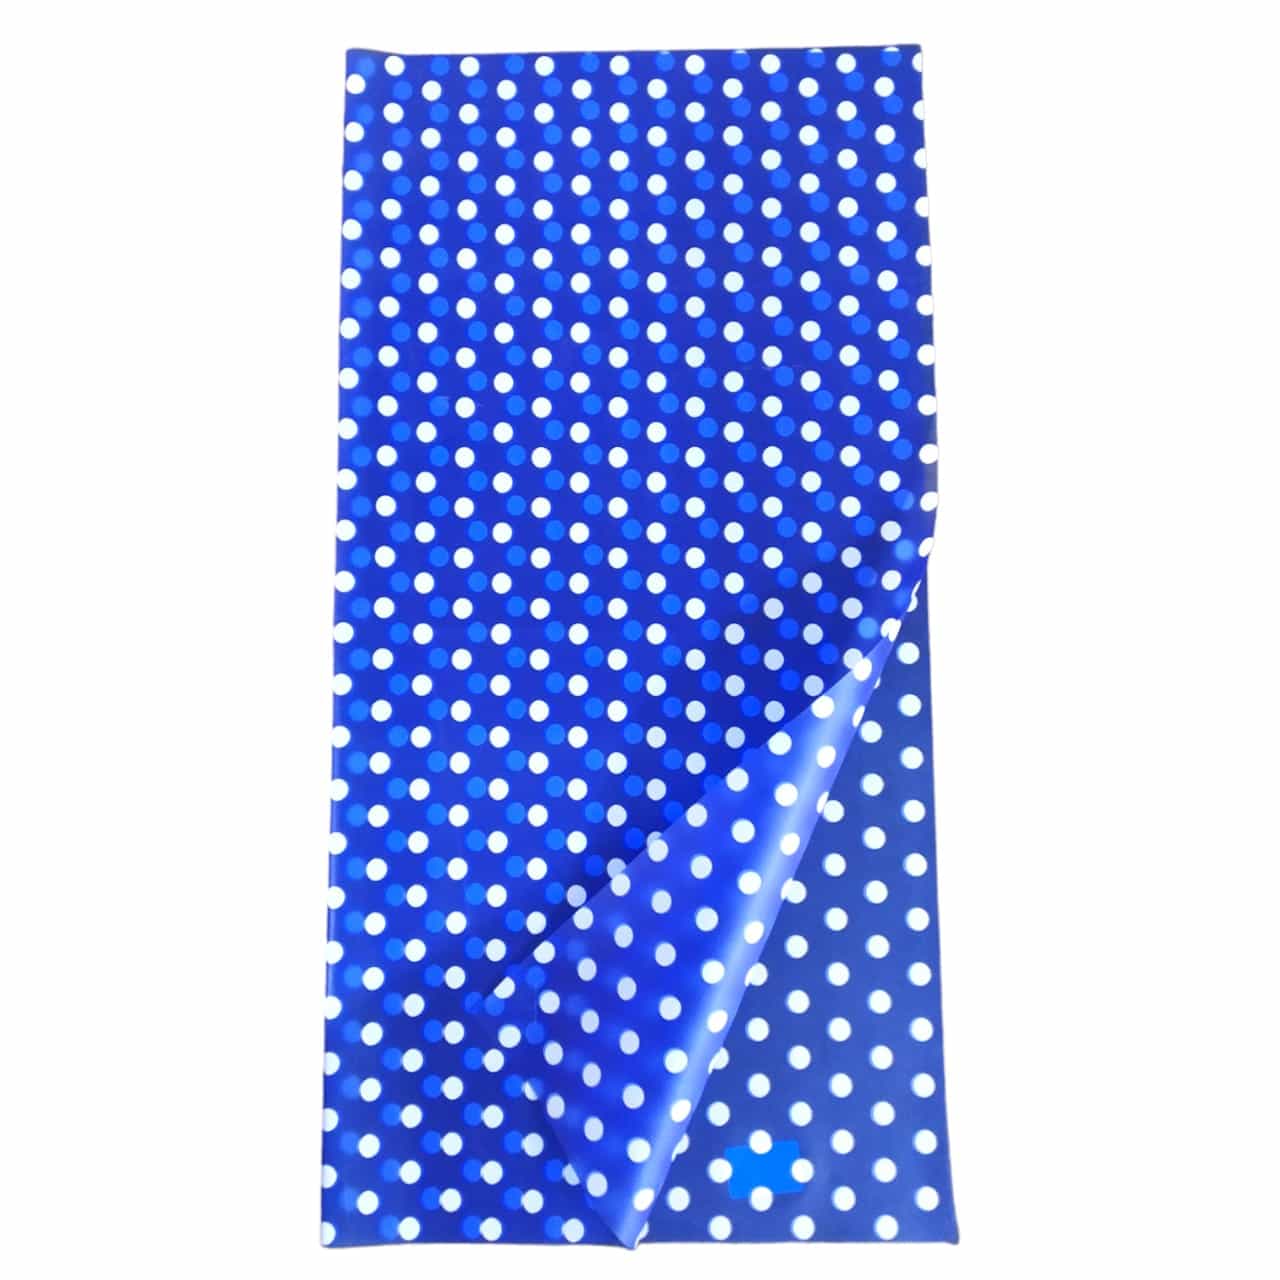 Ravrai Craft - Mumbai Branch Wrapping Paper BLUE Polka Dots Wrapping Paper - Plastic Material, 58x58cm, Pack of 1 Sheet